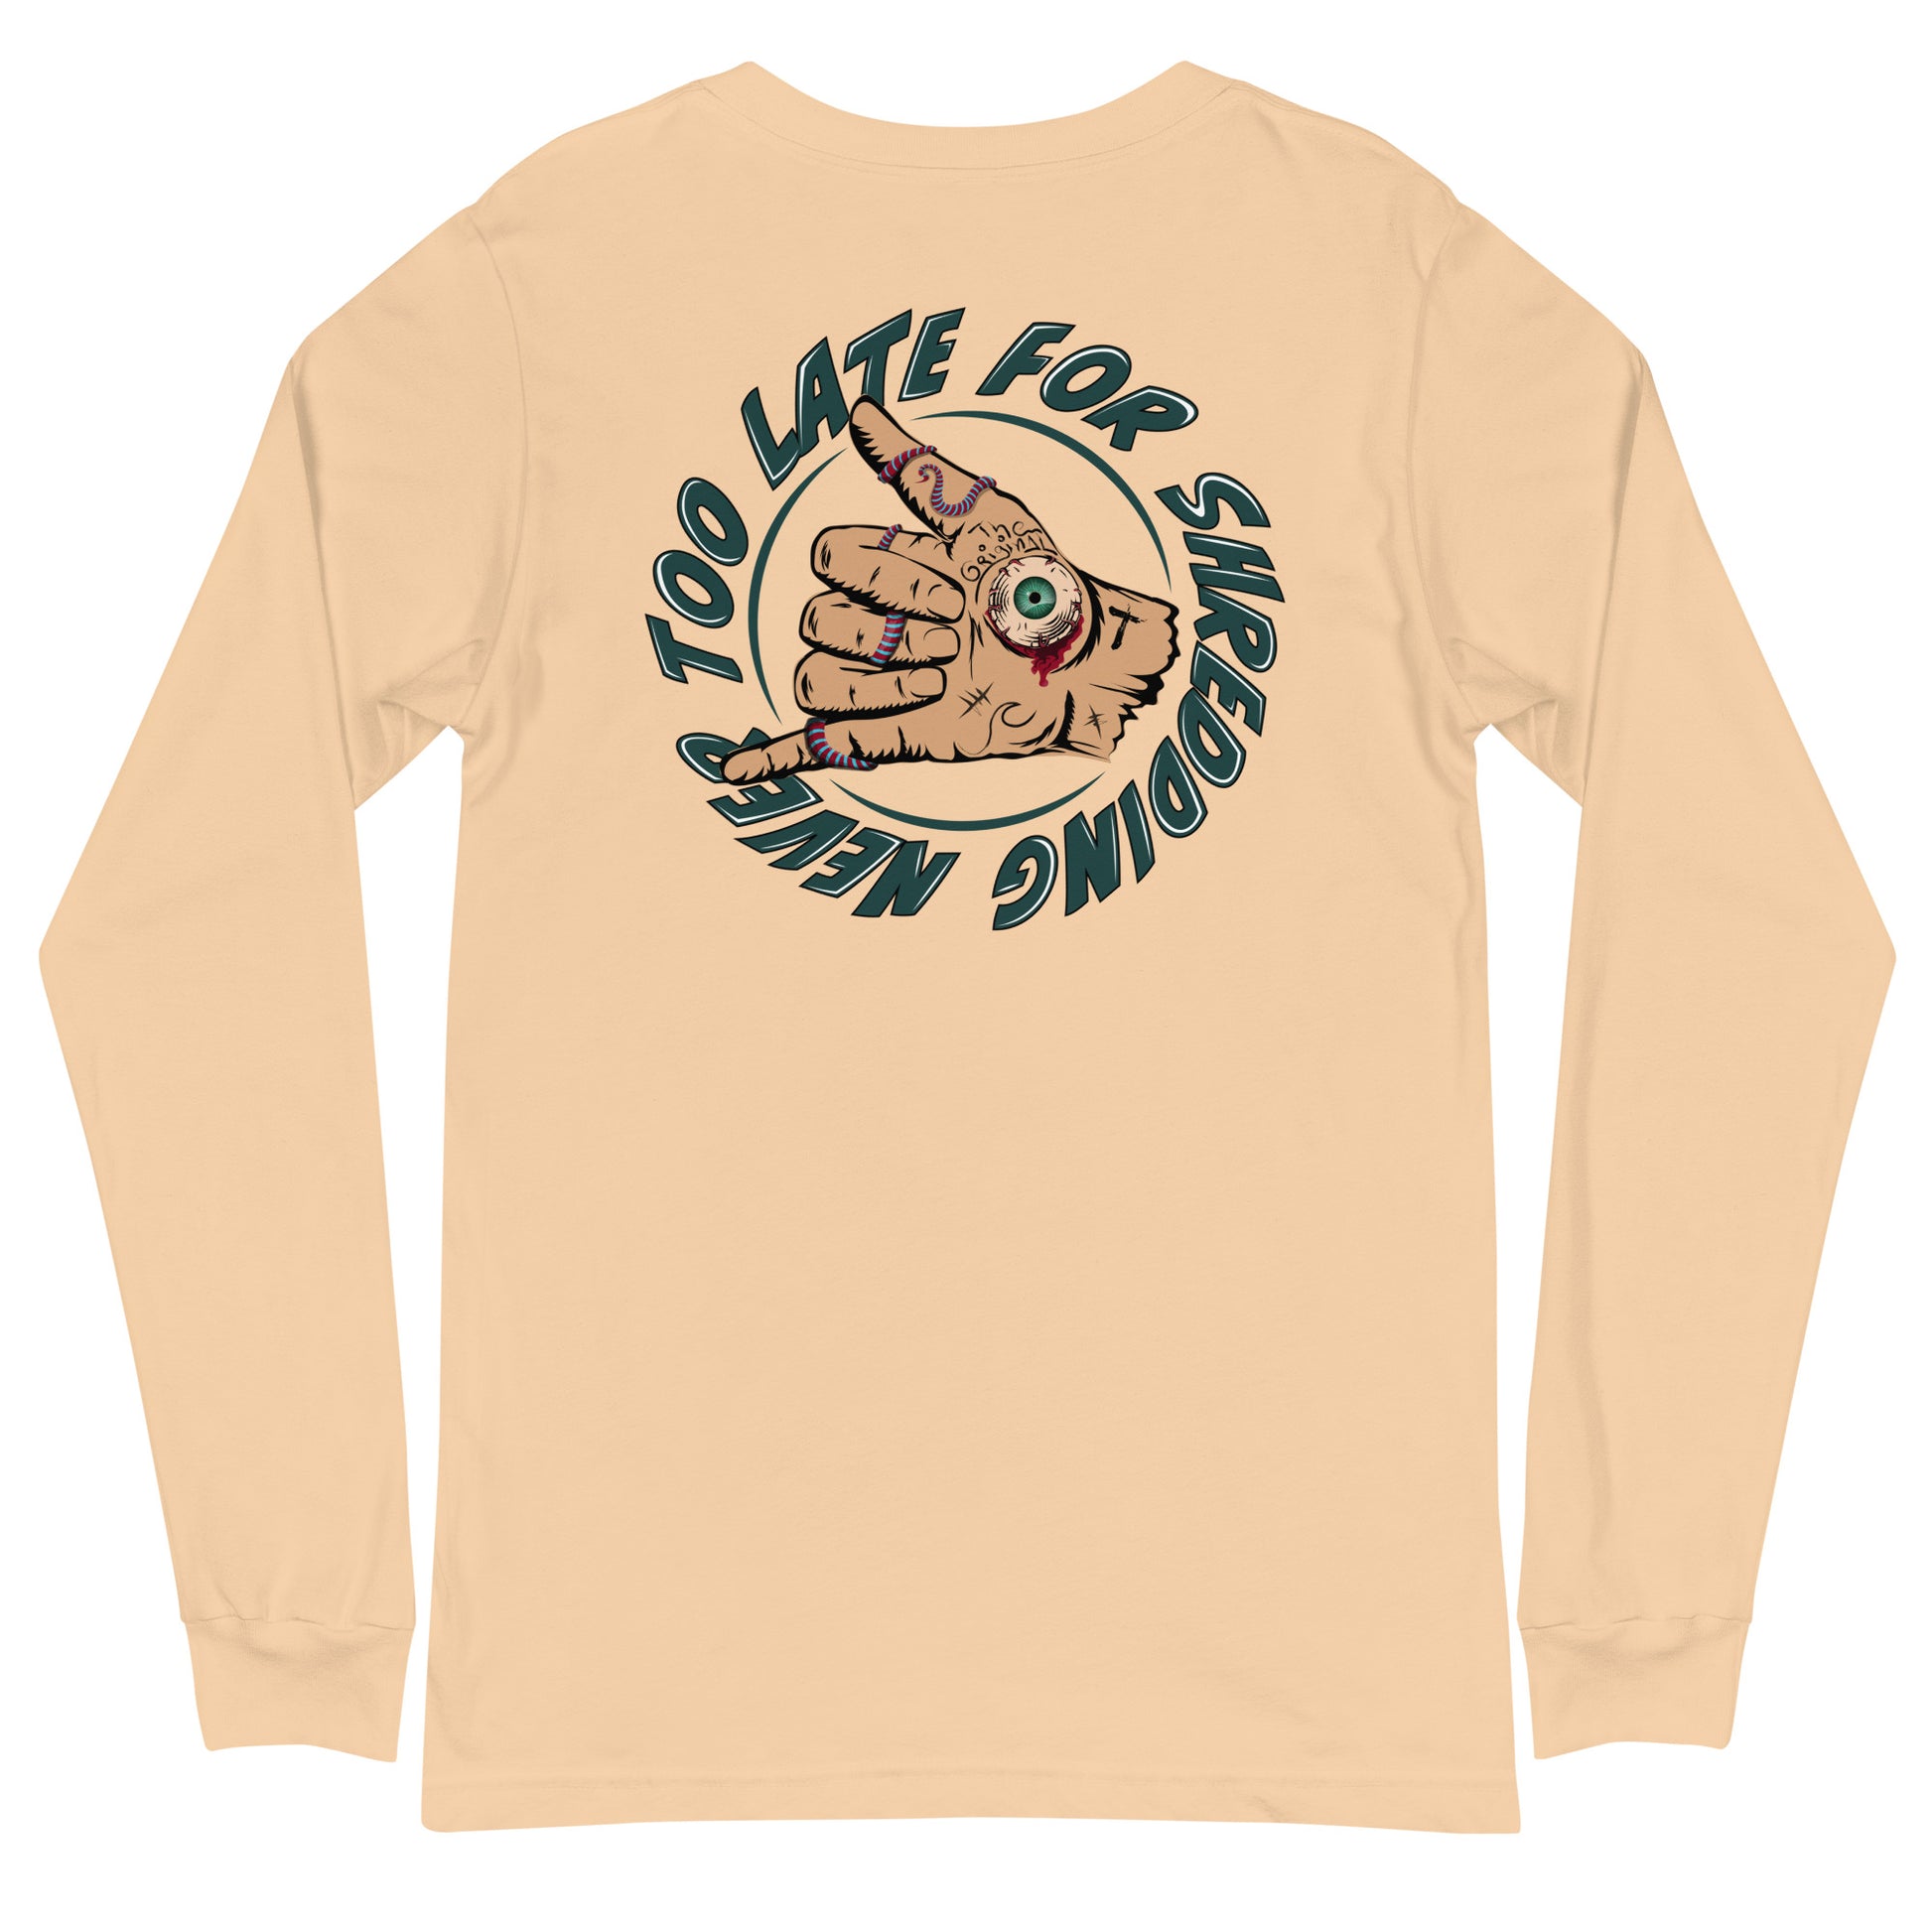 Long Sleeve surfing shaka hand Never Too Late style volcom, dos unisex couleur sable